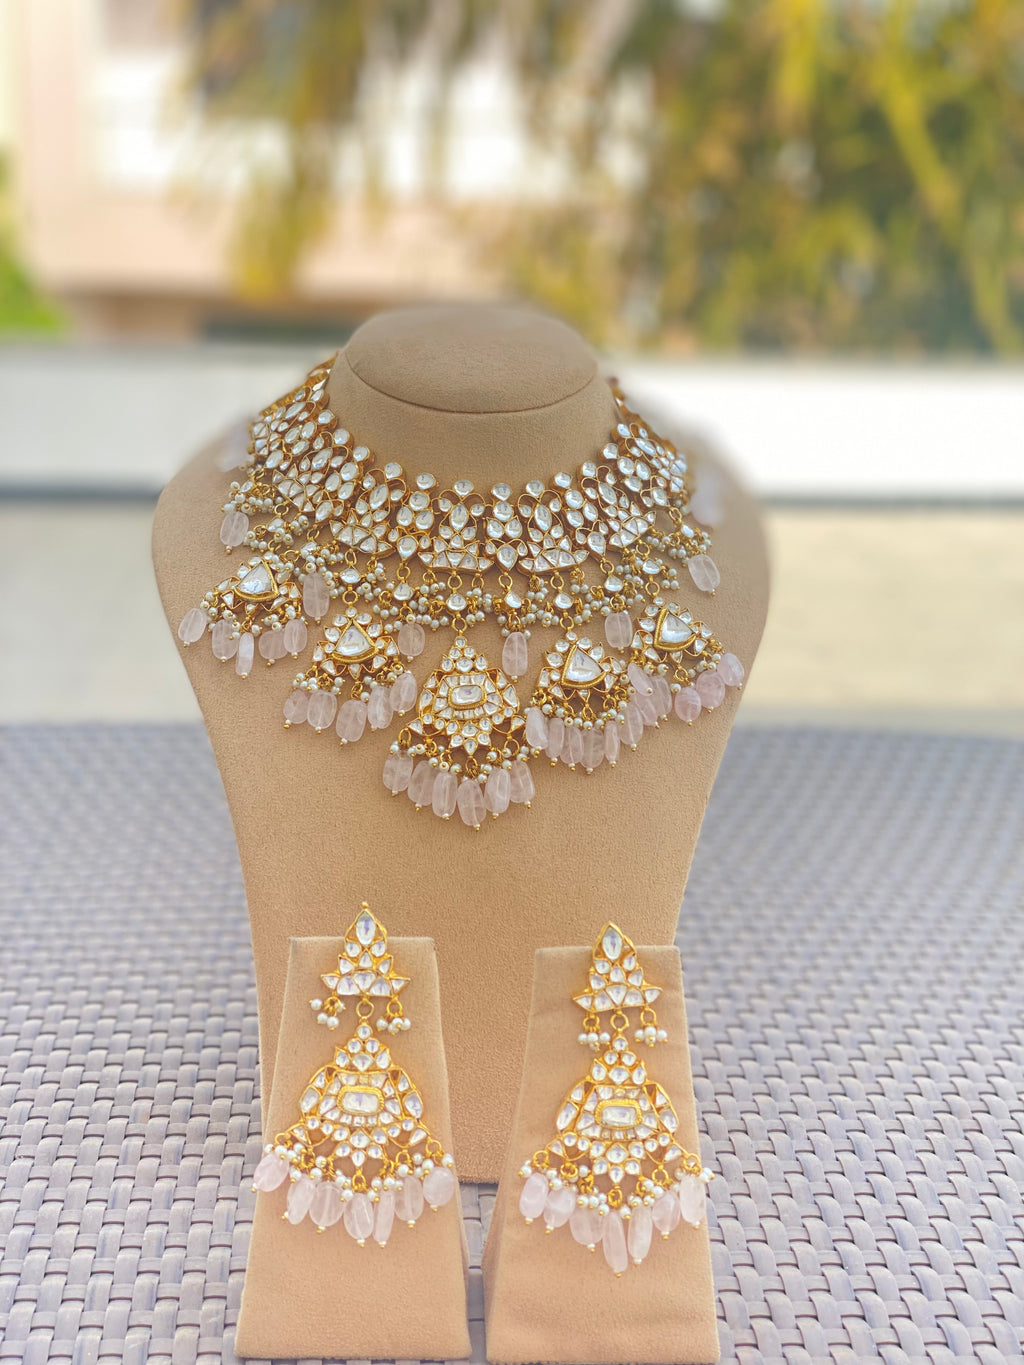 Kundan necklace set with pink drops and earrings